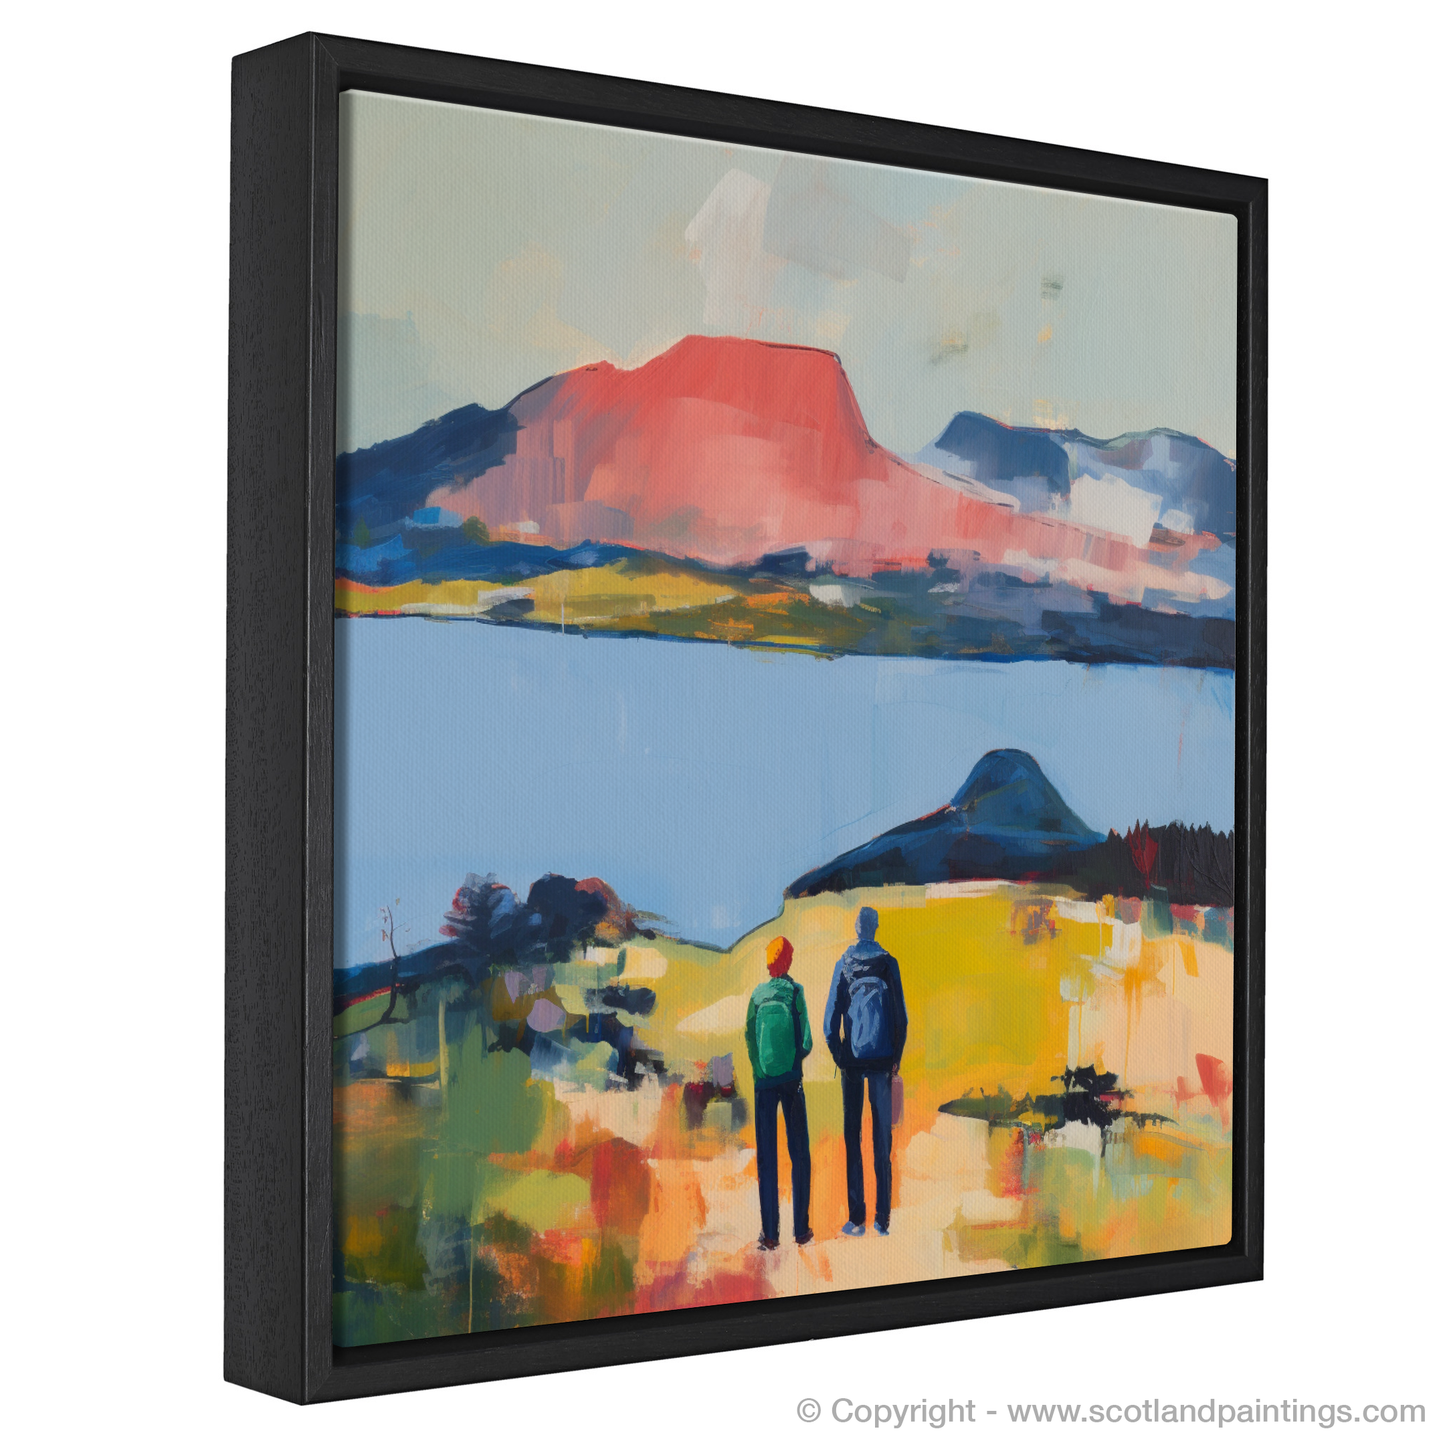 Painting and Art Print of Two hikers looking out on Loch Lomond entitled "Loch Lomond Serenity: An Abstract Exploration".